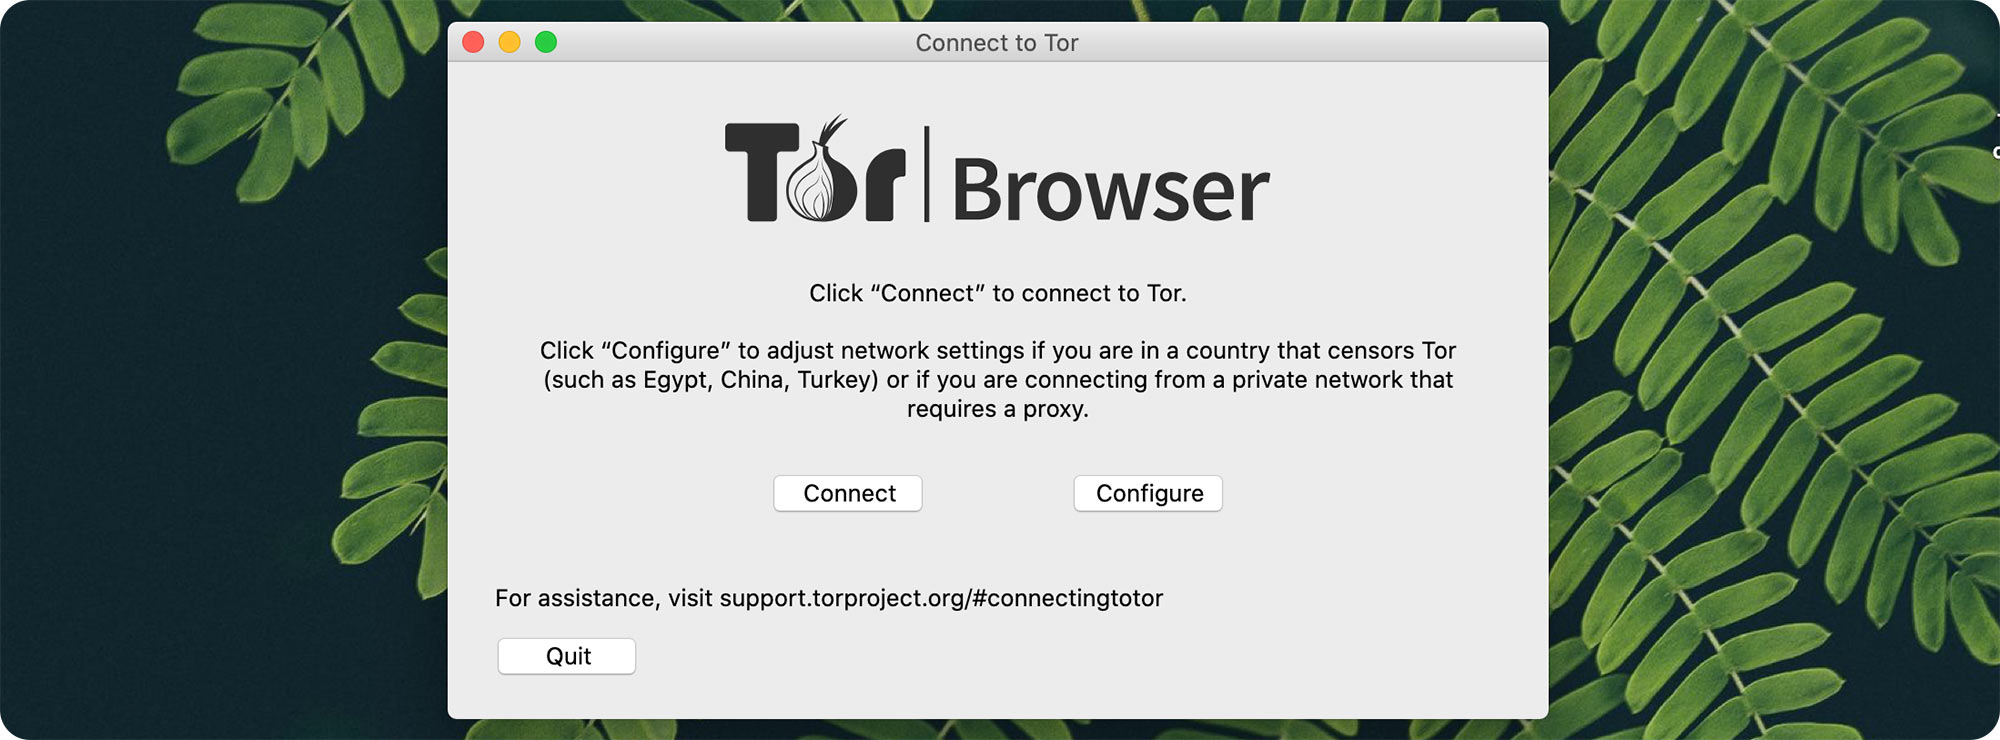 tor browser not connecting mac hidra